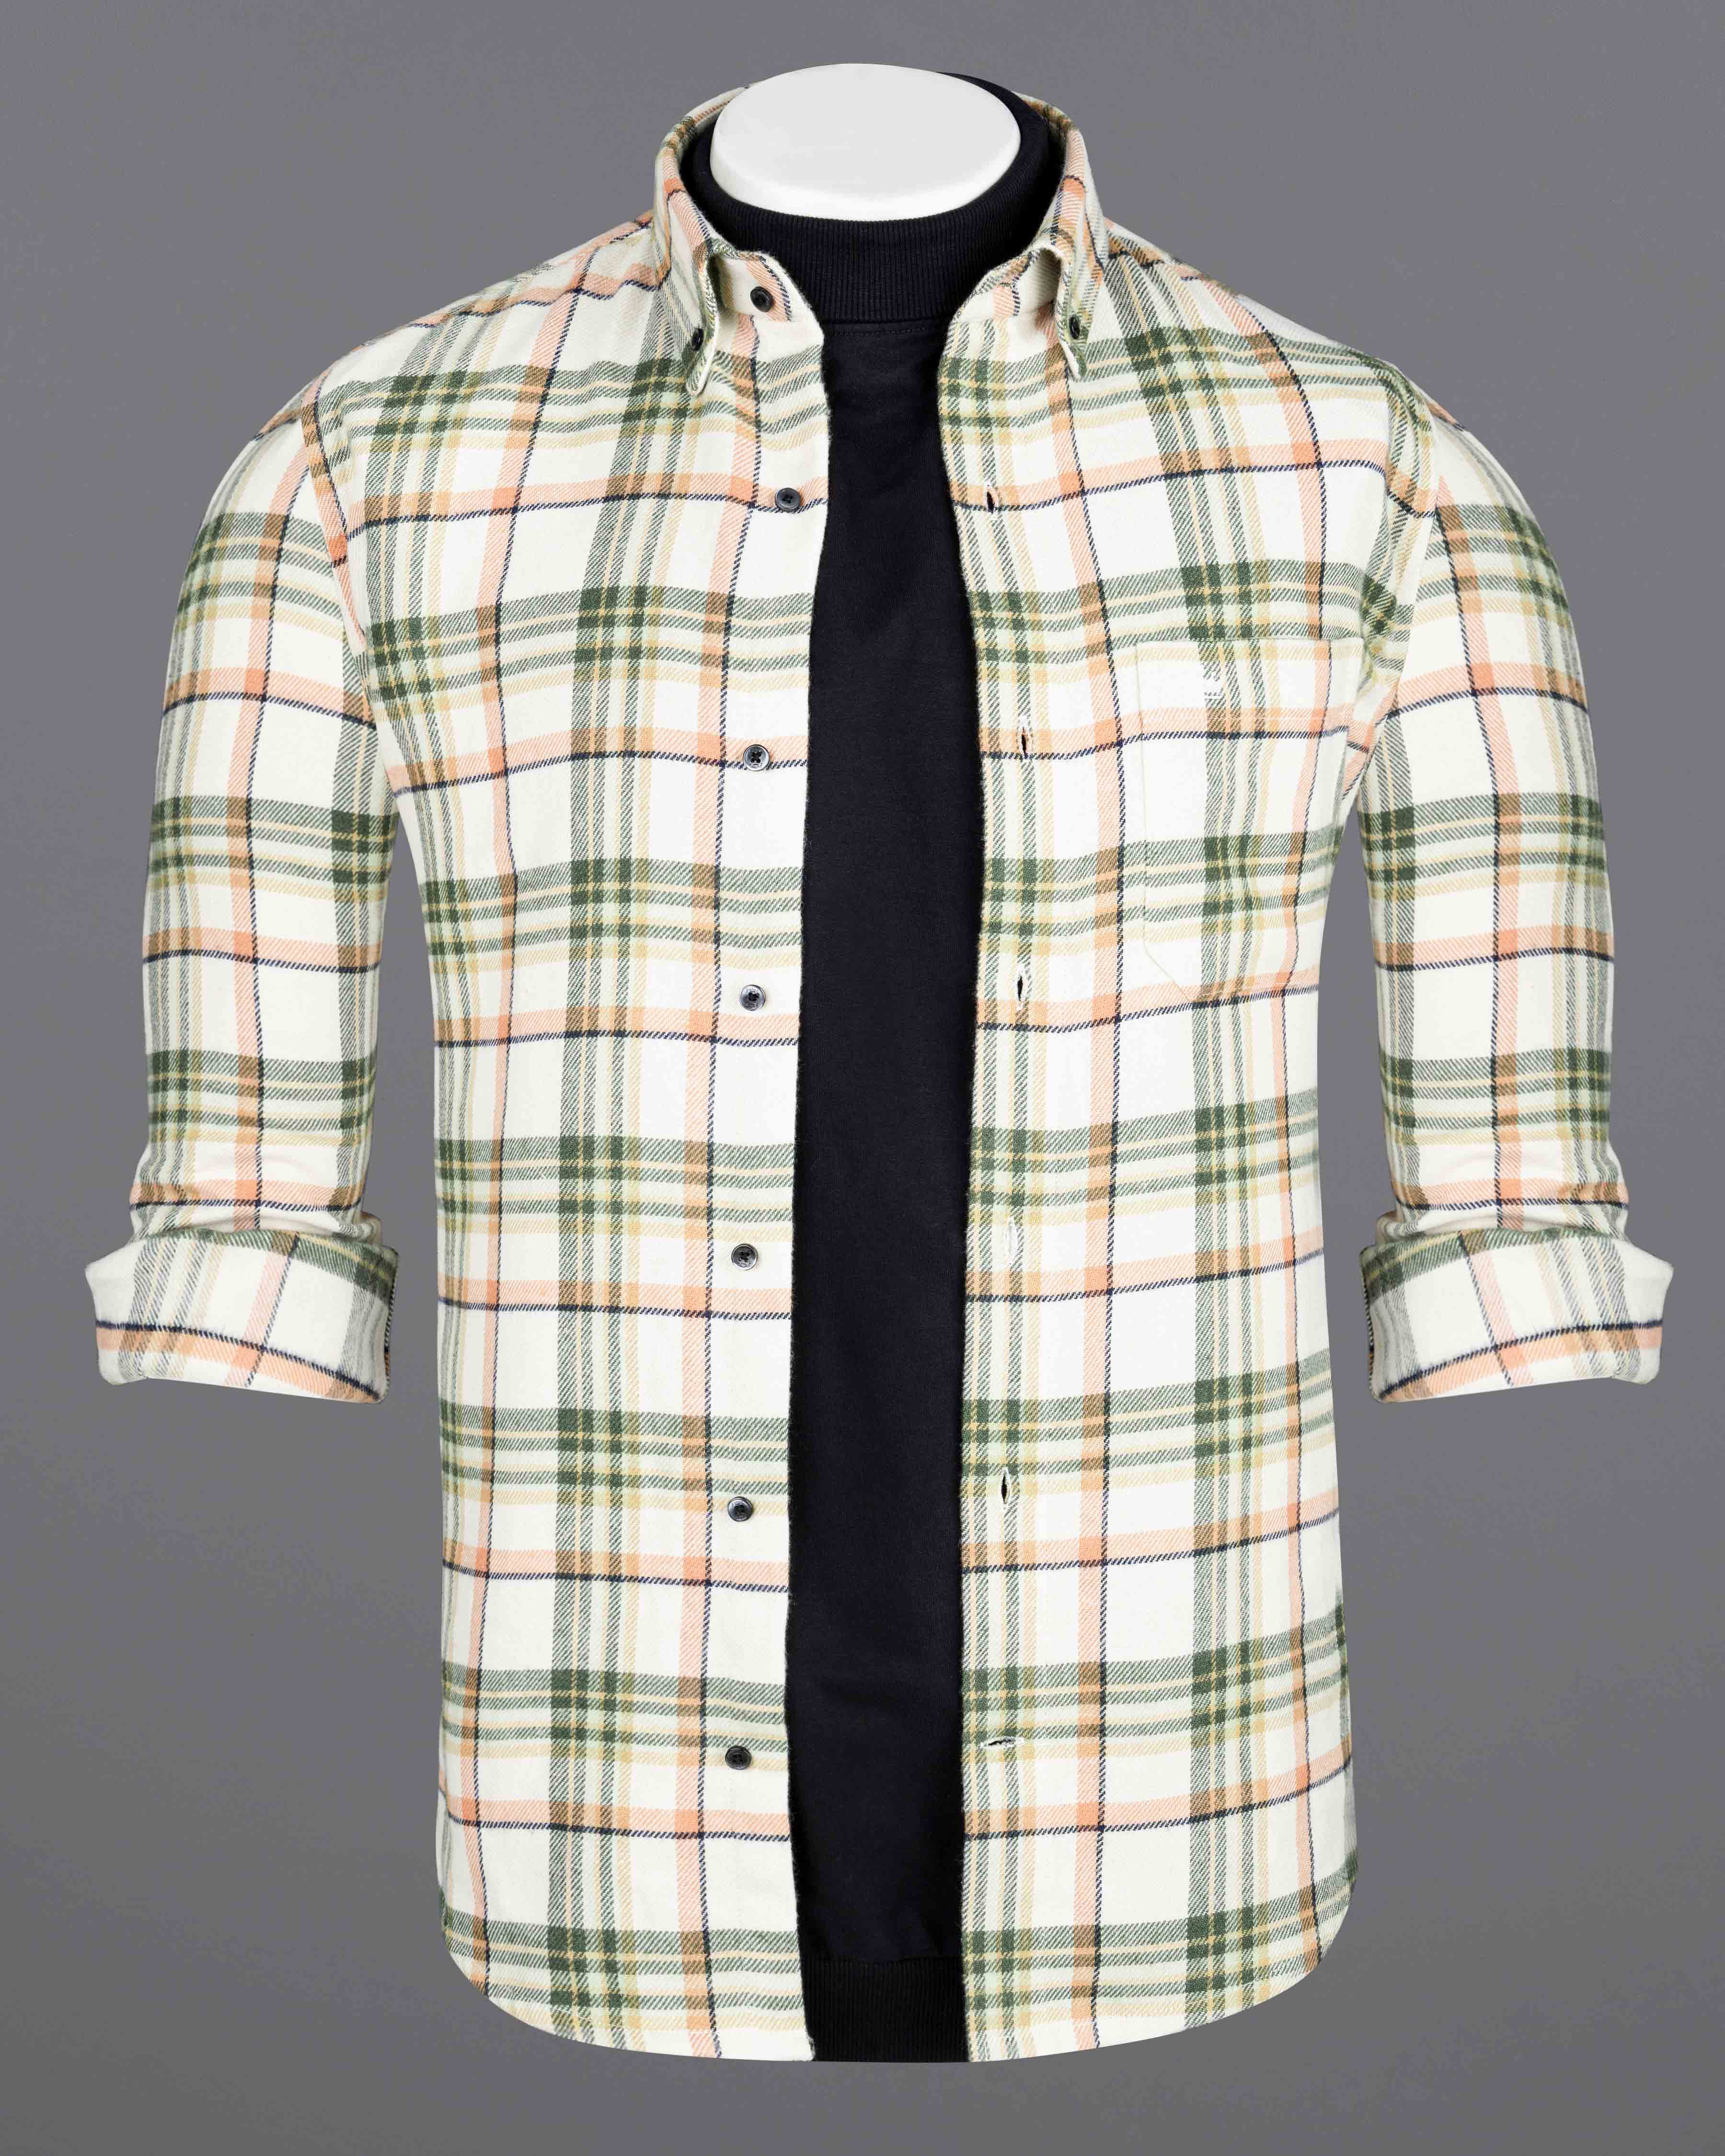 Rum Swizzle with Finch Green Checkered Flannel Overshirt 6643-BD-BLK-OS-38,6643-BD-BLK-OS-H-38,6643-BD-BLK-OS-39,6643-BD-BLK-OS-H-39,6643-BD-BLK-OS-40,6643-BD-BLK-OS-H-40,6643-BD-BLK-OS-42,6643-BD-BLK-OS-H-42,6643-BD-BLK-OS-44,6643-BD-BLK-OS-H-44,6643-BD-BLK-OS-46,6643-BD-BLK-OS-H-46,6643-BD-BLK-OS-48,6643-BD-BLK-OS-H-48,6643-BD-BLK-OS-50,6643-BD-BLK-OS-H-50,6643-BD-BLK-OS-52,6643-BD-BLK-OS-H-52